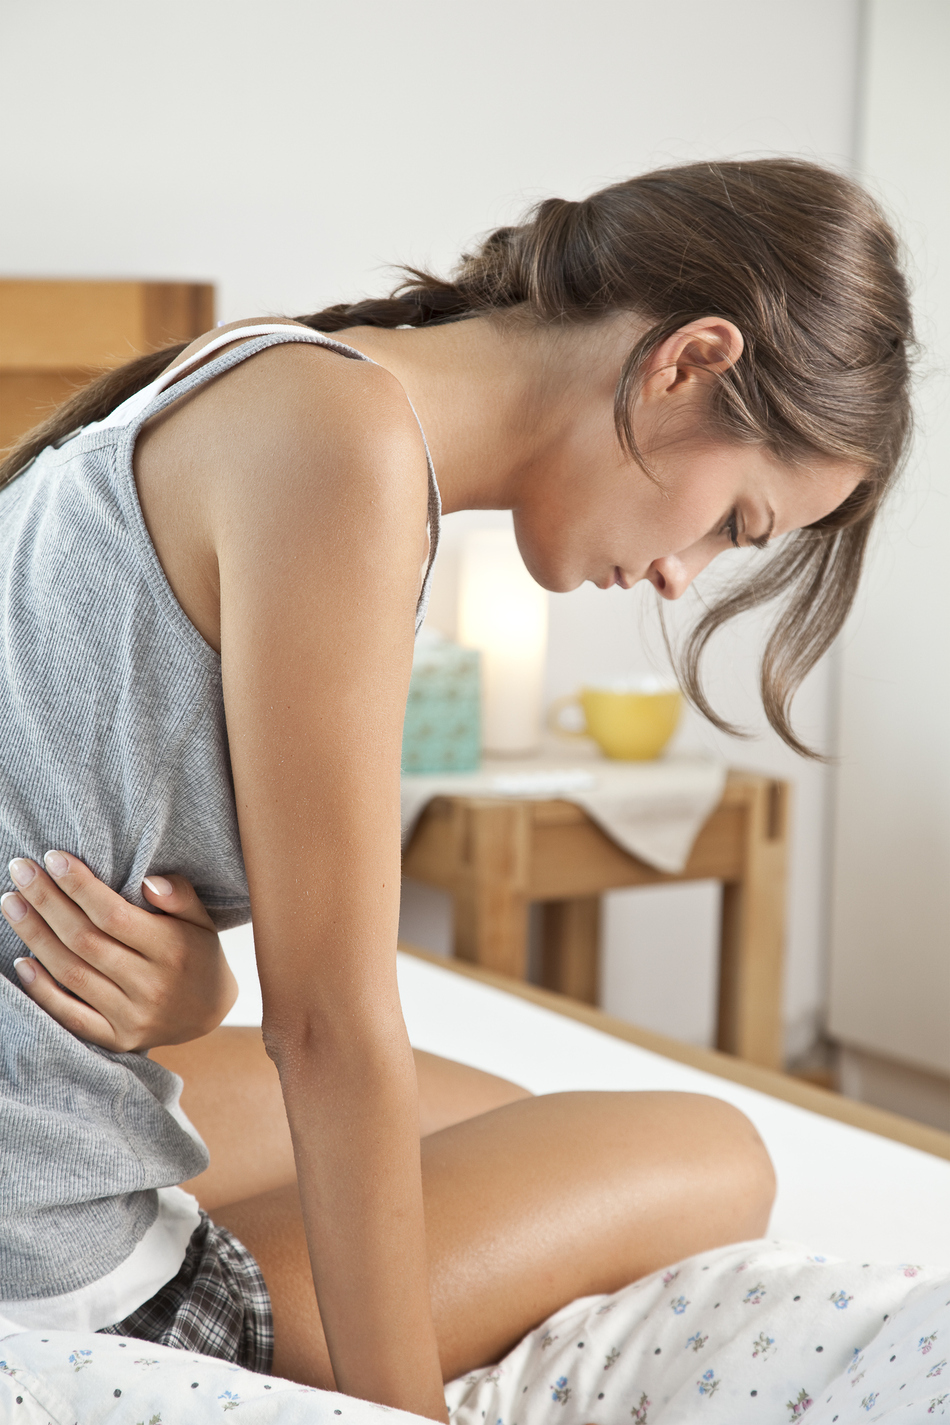 Natural Remedies for Period Pains